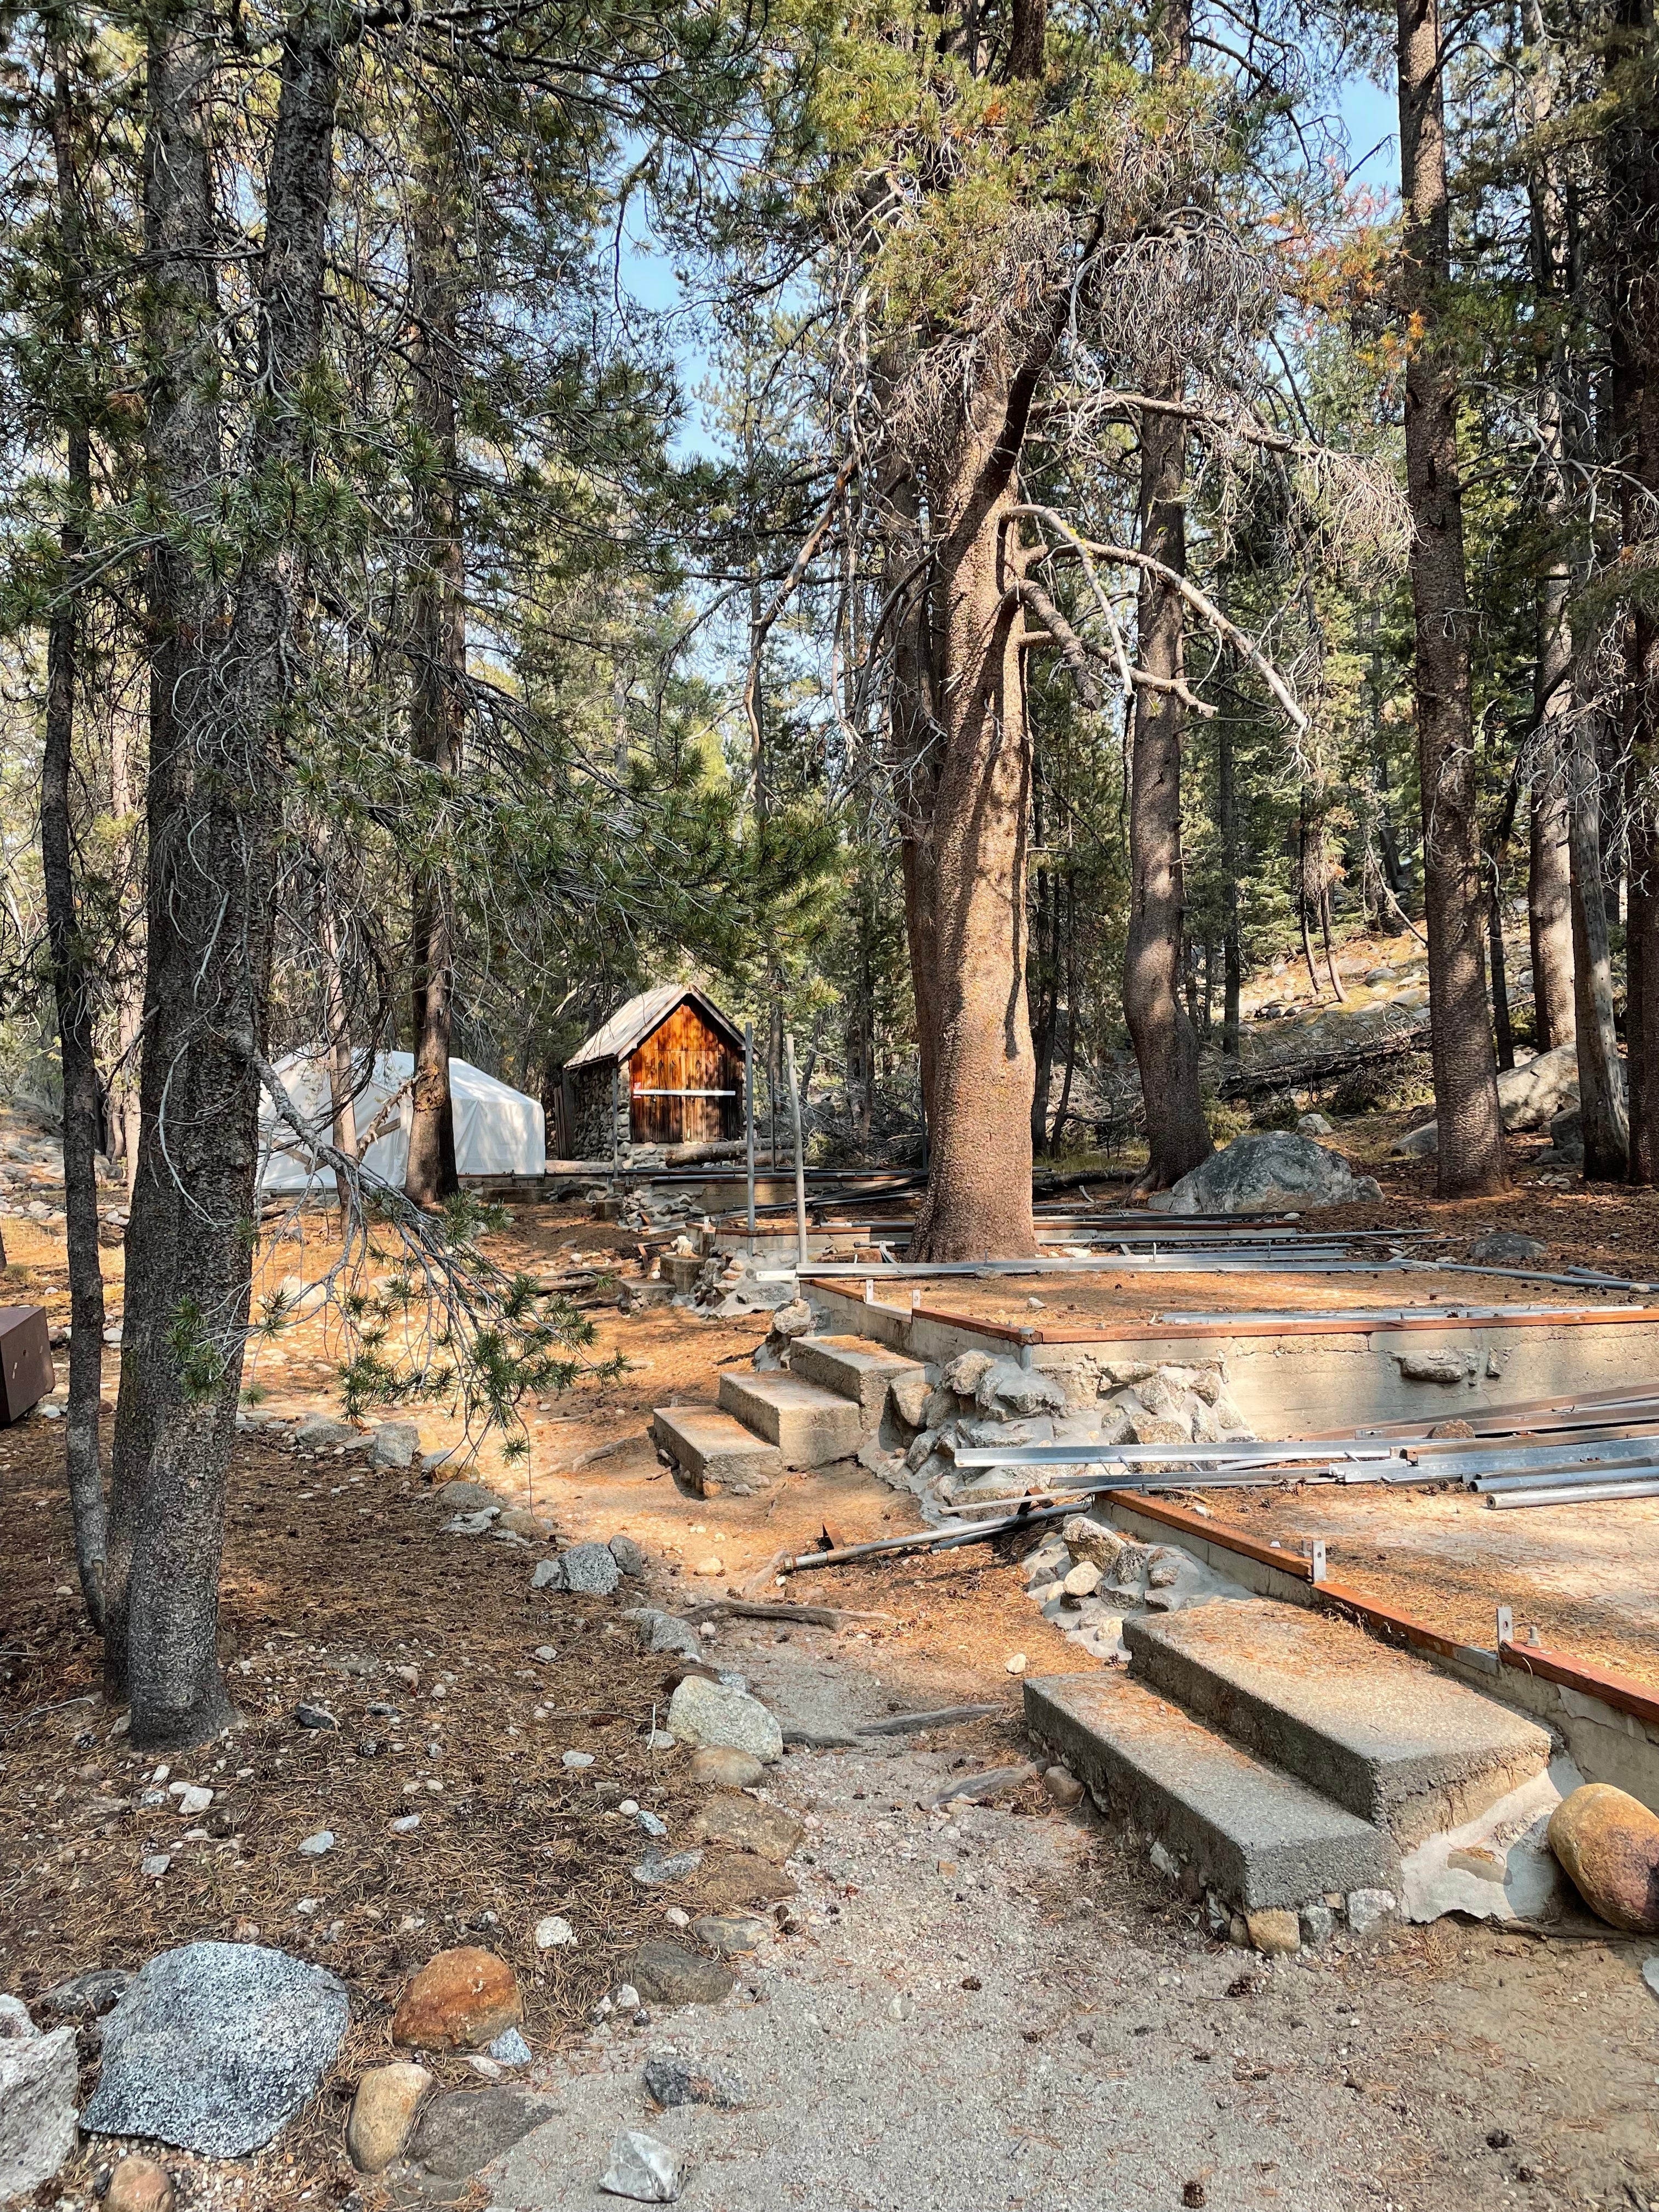 Camper submitted image from Glen Aulin High Sierra Camp — Yosemite National Park - 3